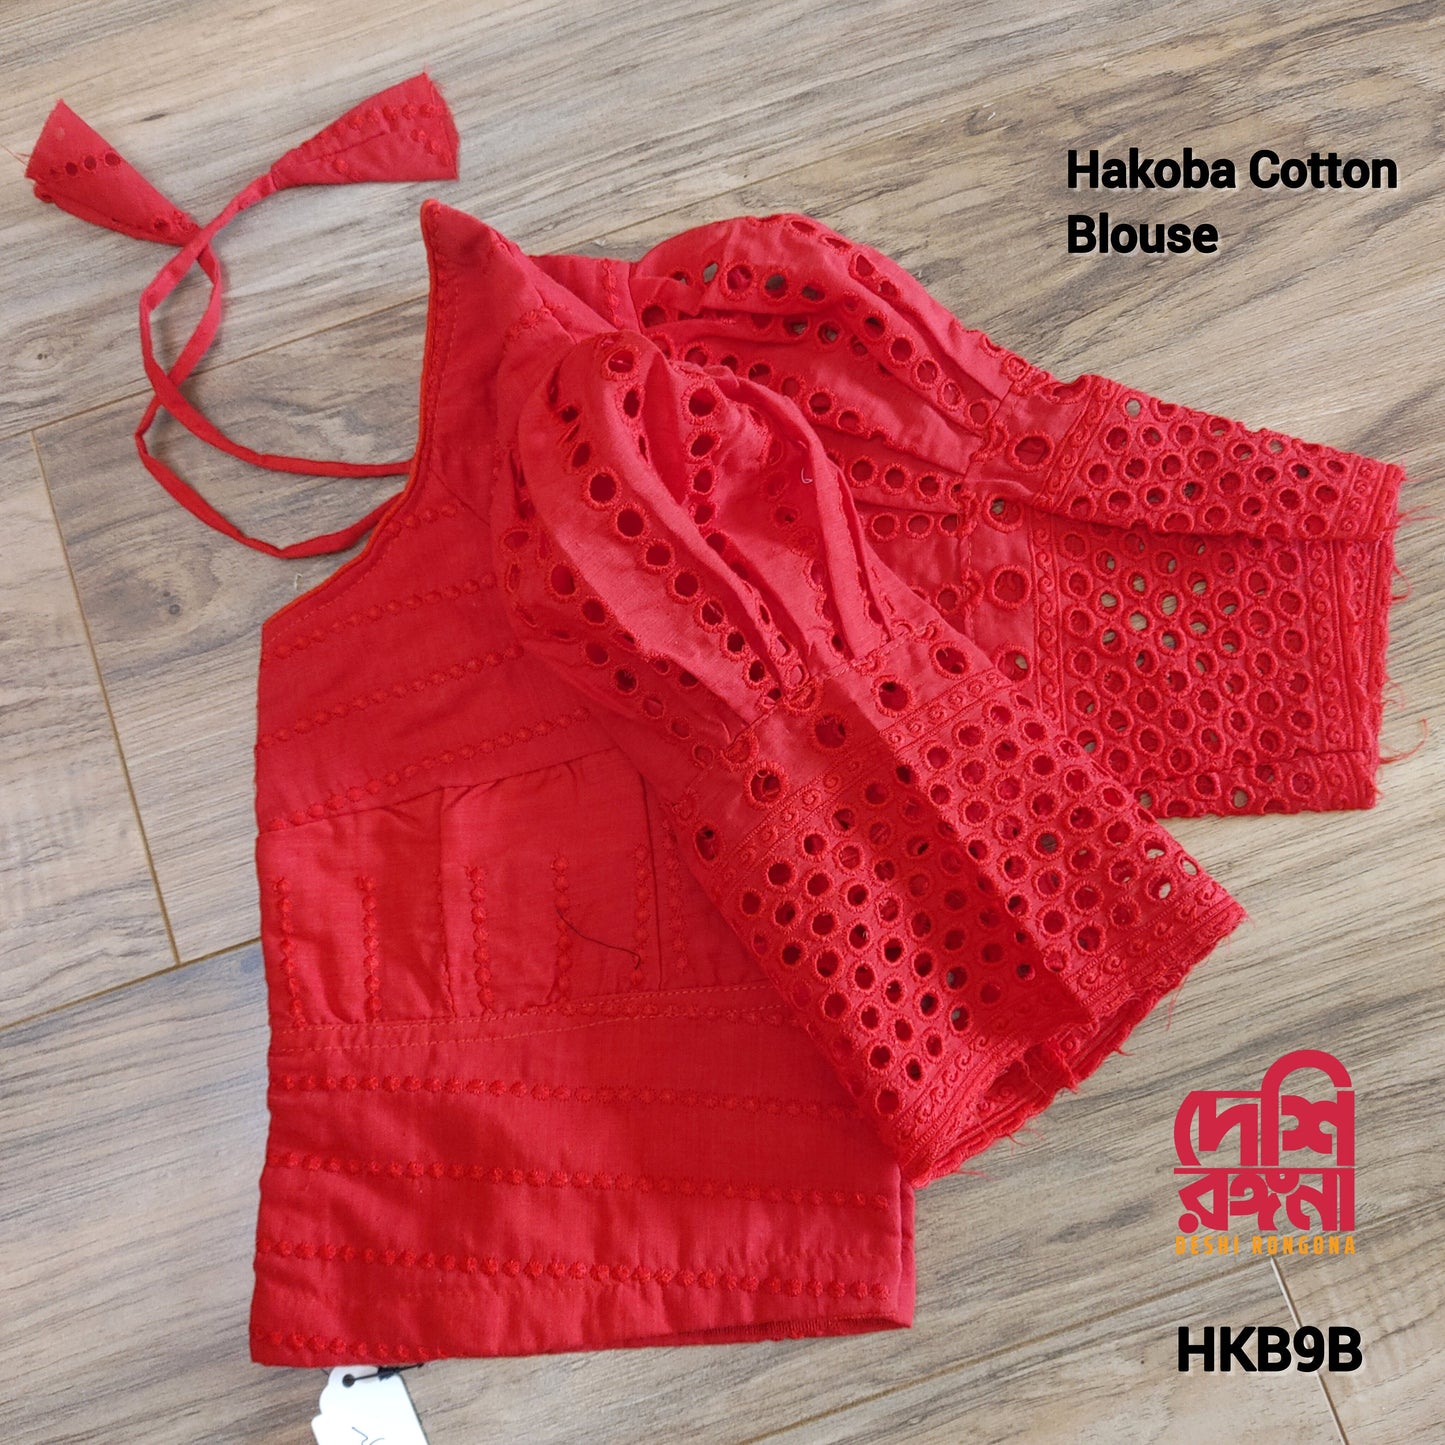 Hakoba Cotton Blouse, Size 34 to 44, Red, Comfortable, Soft, goes with any saree collection you have in your closet, No Extra fabric inside